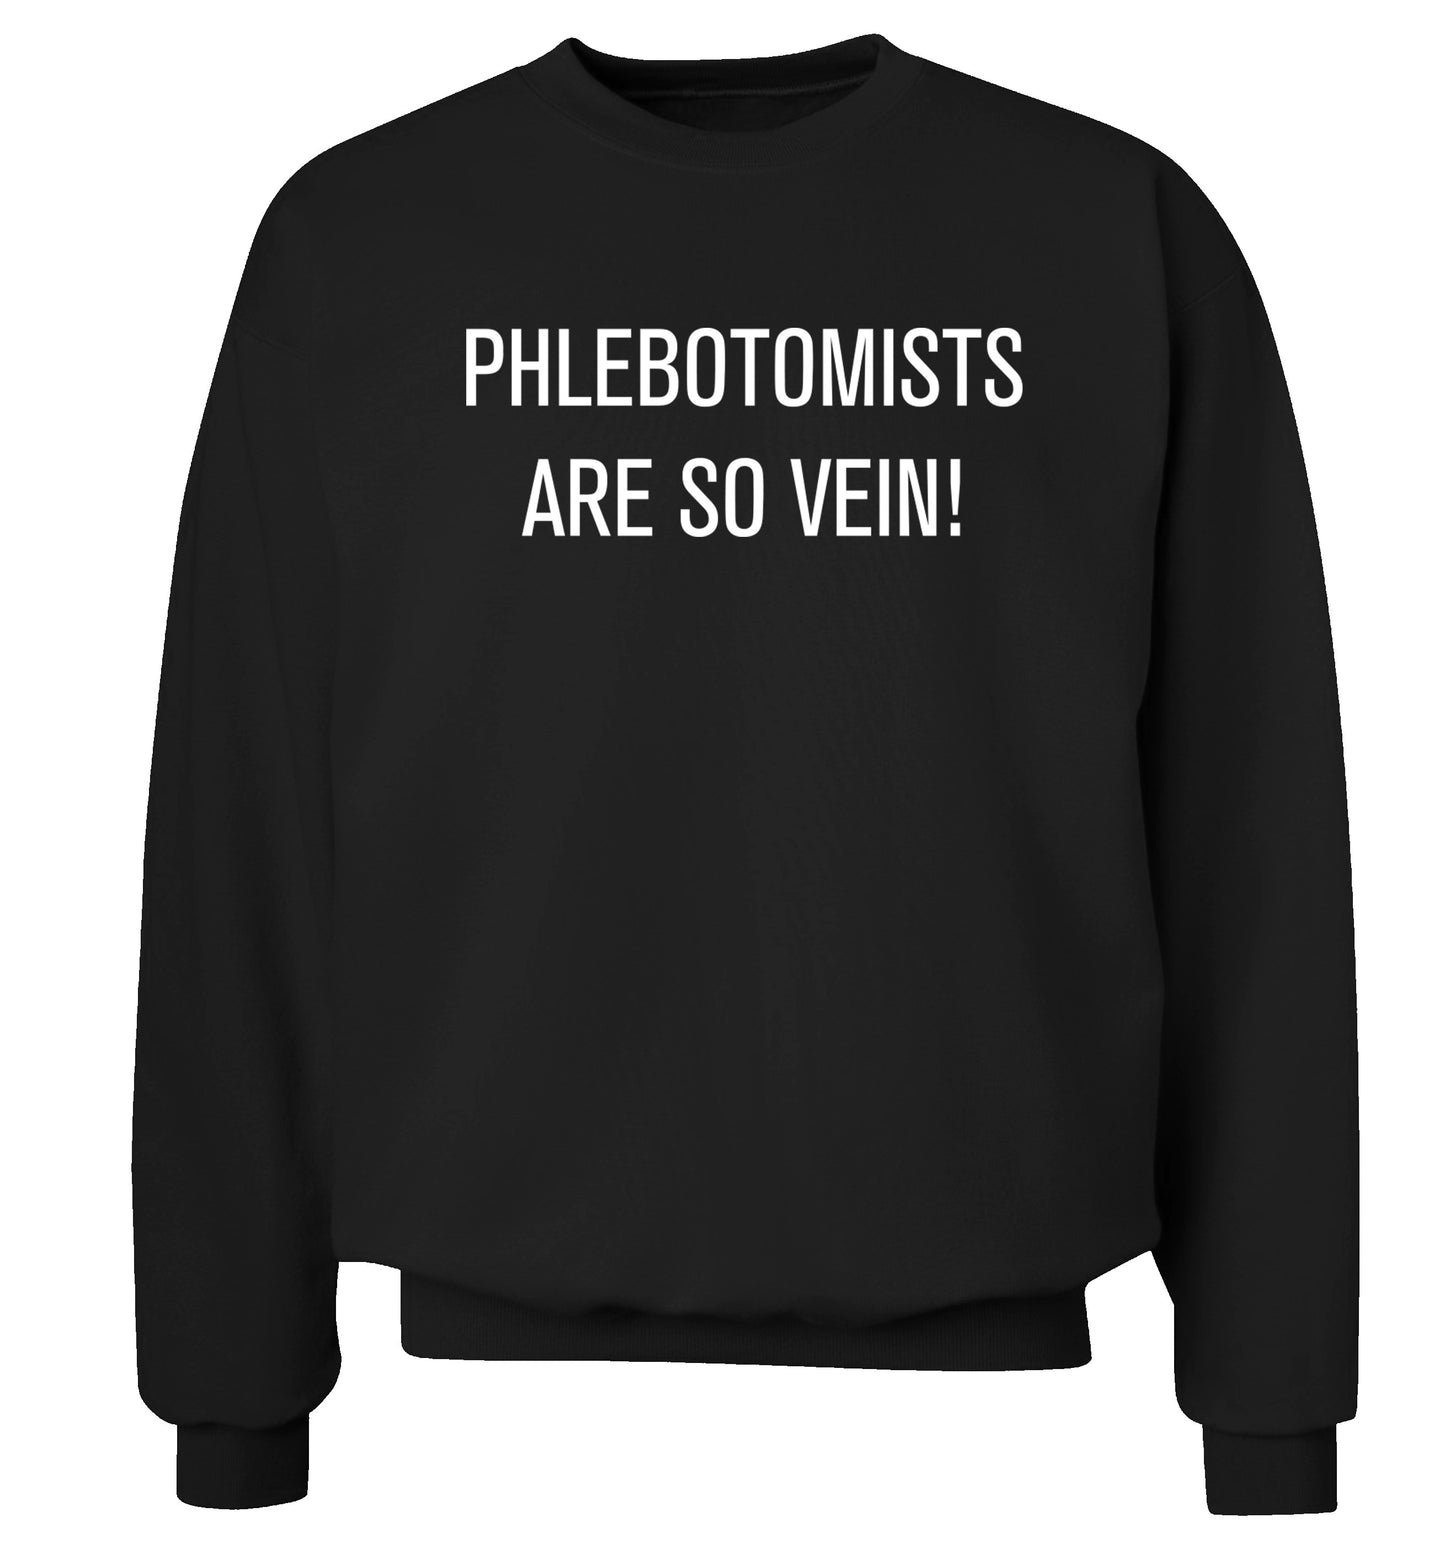 Phlebotomists are so vein! Adult's unisex black Sweater 2XL